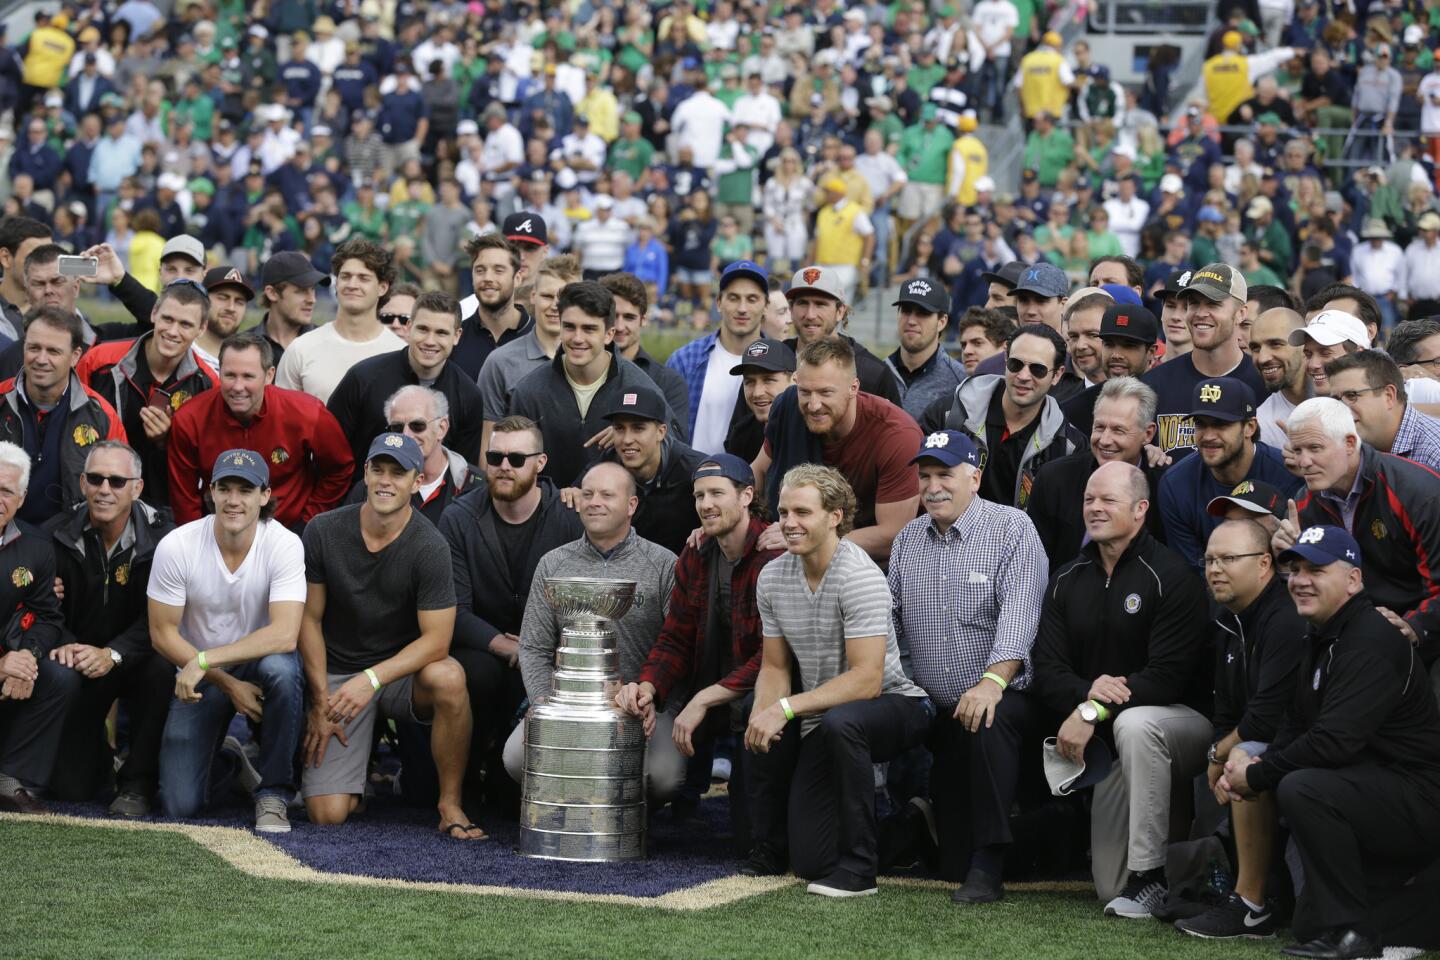 The Blackhawks pose with the Stanley Cup before the Notre Dame-Georgia Tech game in South Bend, Ind.